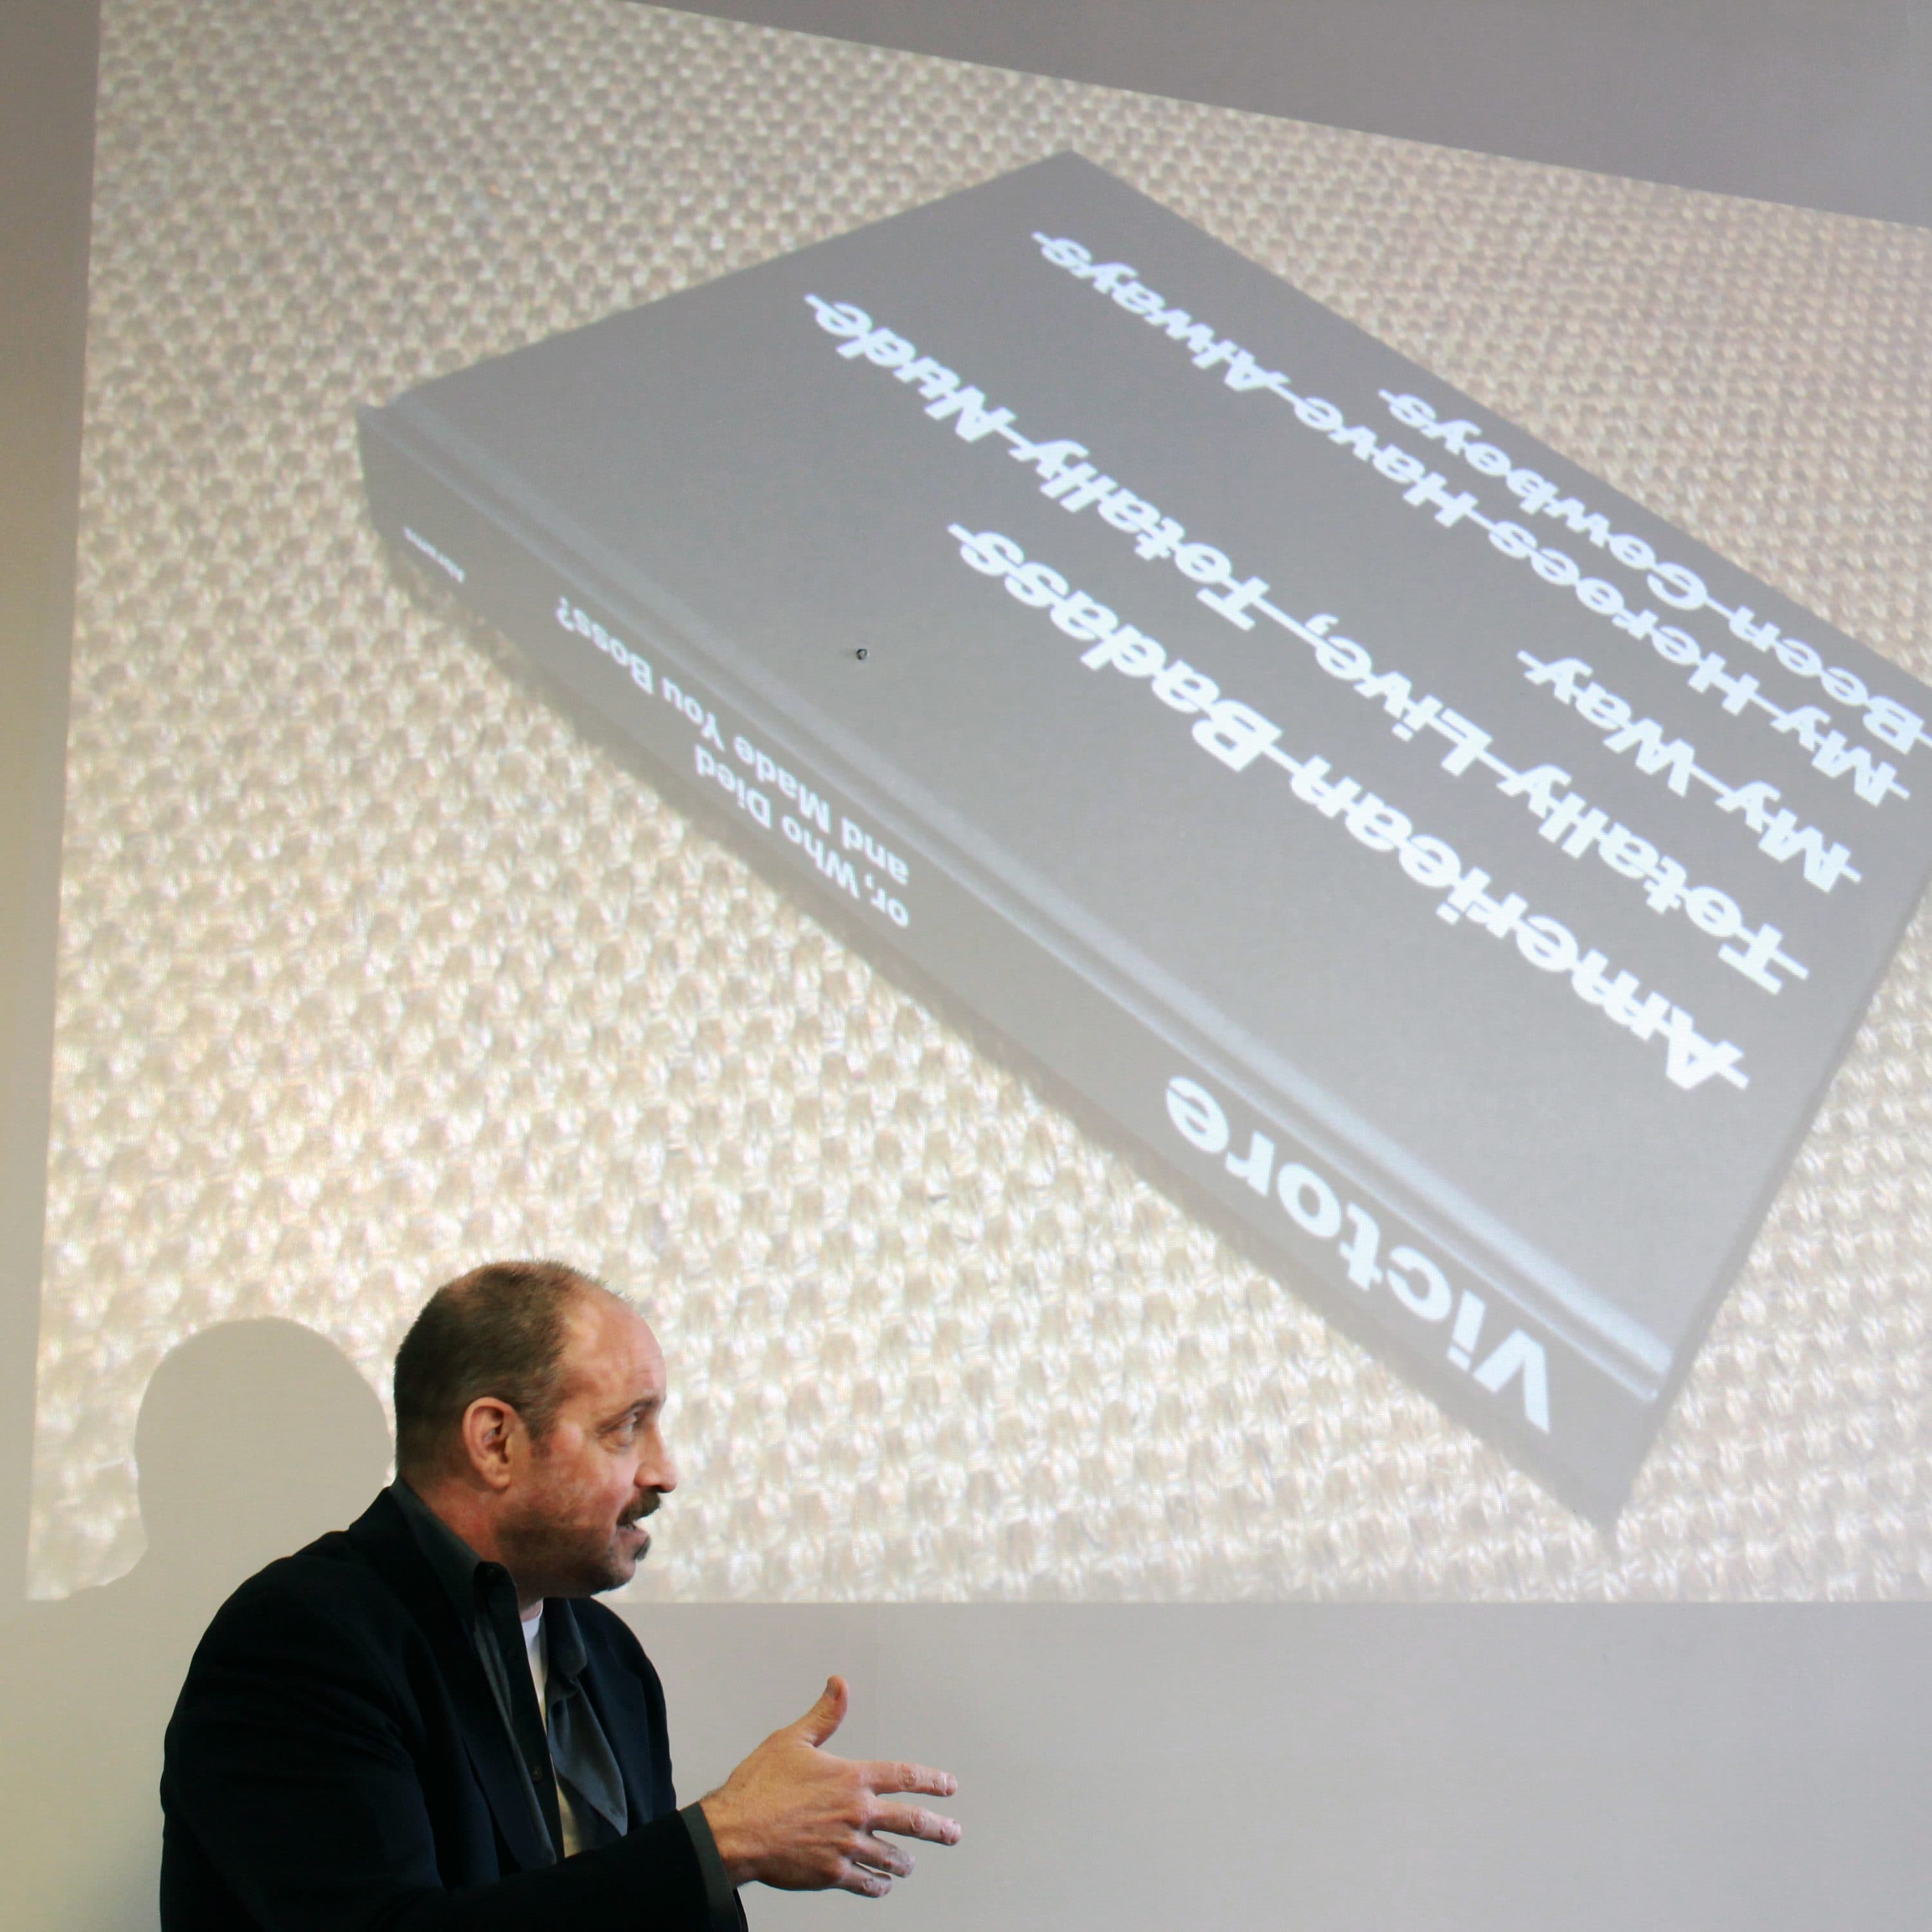 A man in a suit gestures while speaking in front of a projected image of a book titled "American B ALBB Moscow/ ViktoRE Family Tree Branch City History" on a wall. The book is black with white text and is placed on a textured surface.